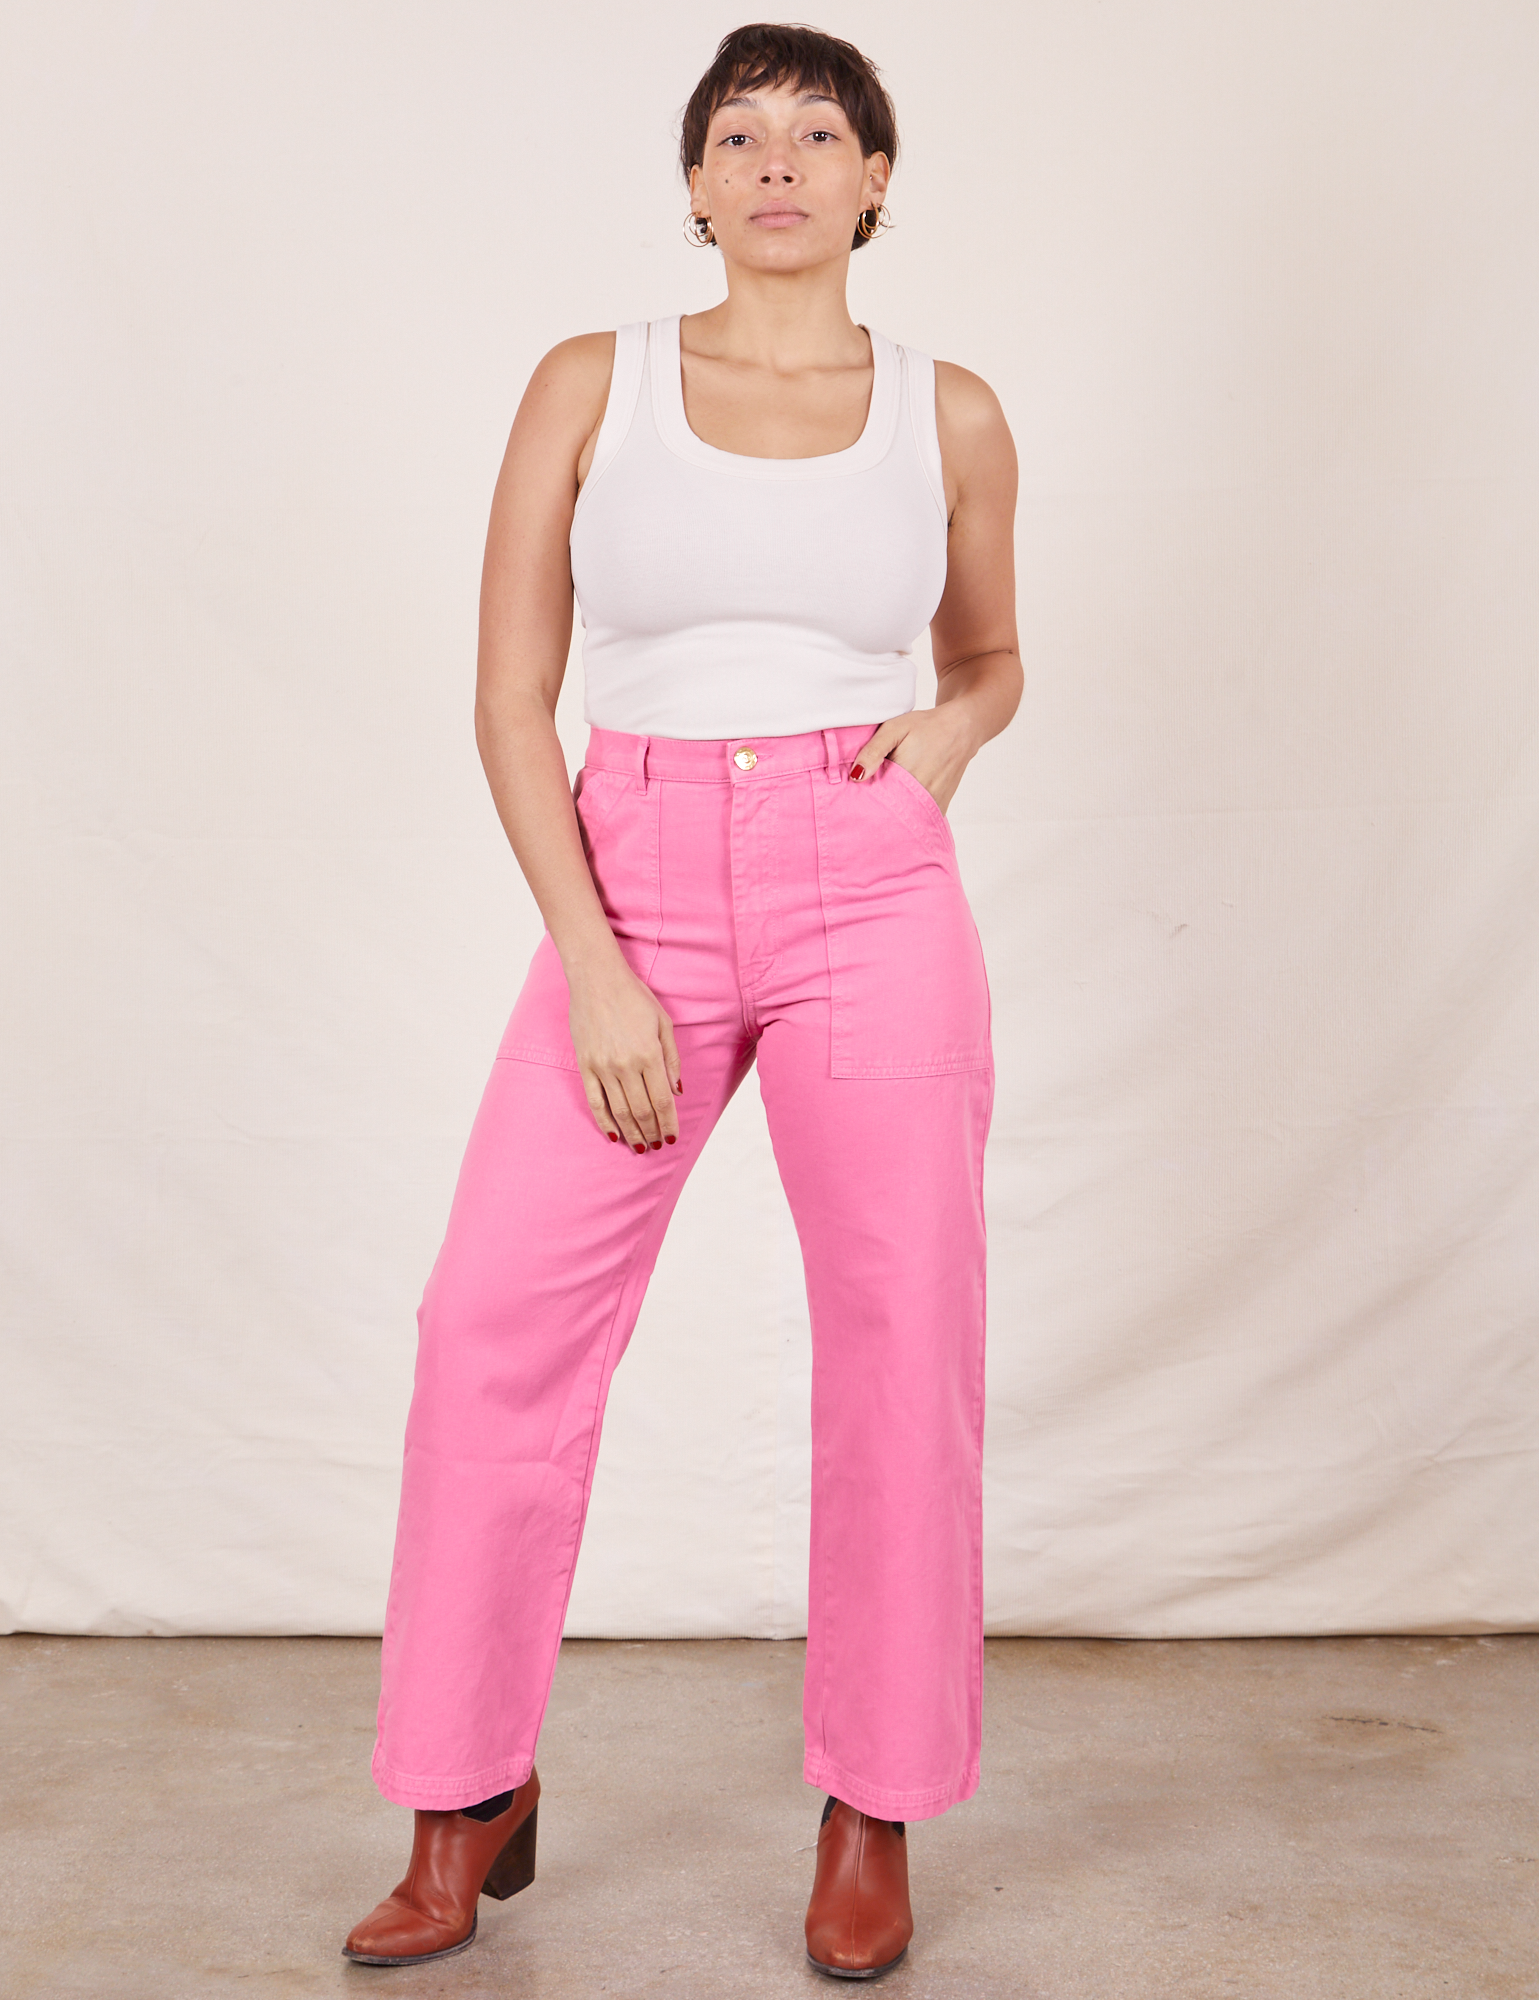 Tiara is 5&#39;4&quot; and wearing size S Work Pants in Bubblegum Pink paired with Tank Top in vintage tee off-white